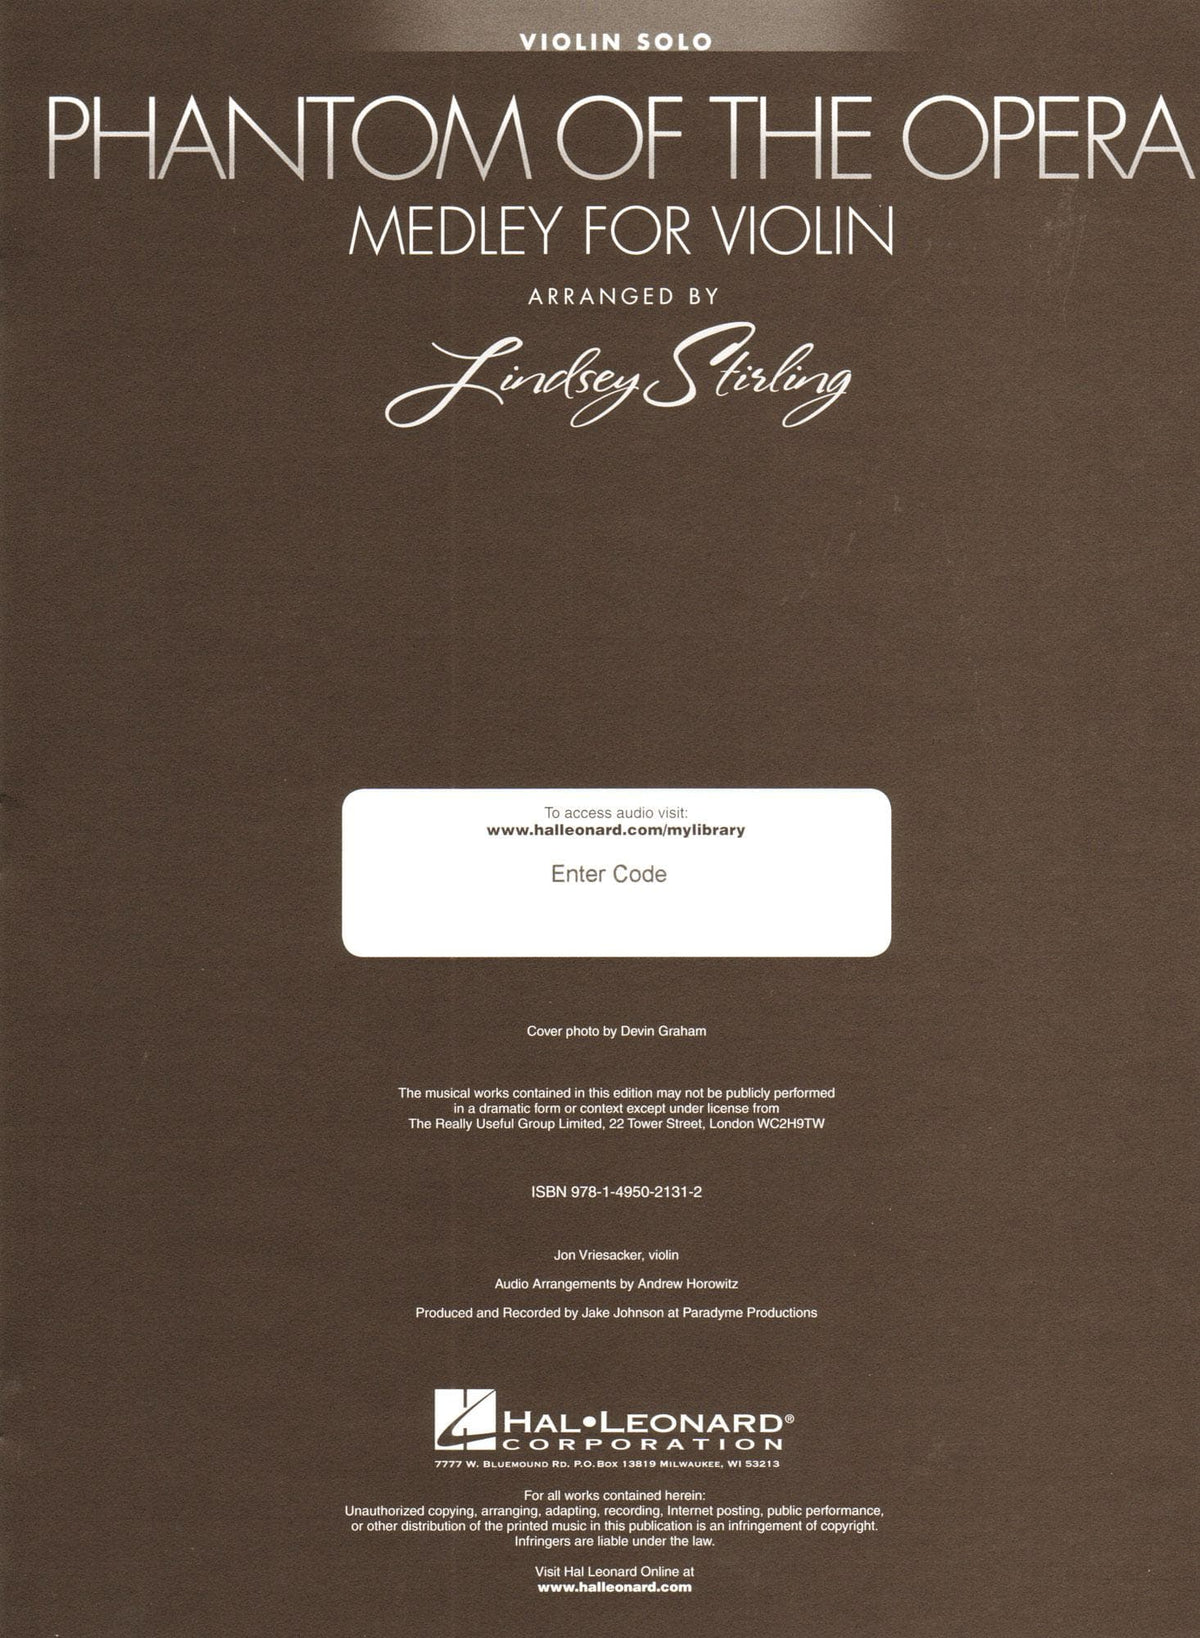 Phantom Of The Opera - Medley for Violin with Audio Accompaniment - arranged by Lindsey Stirling - Hal Leonard